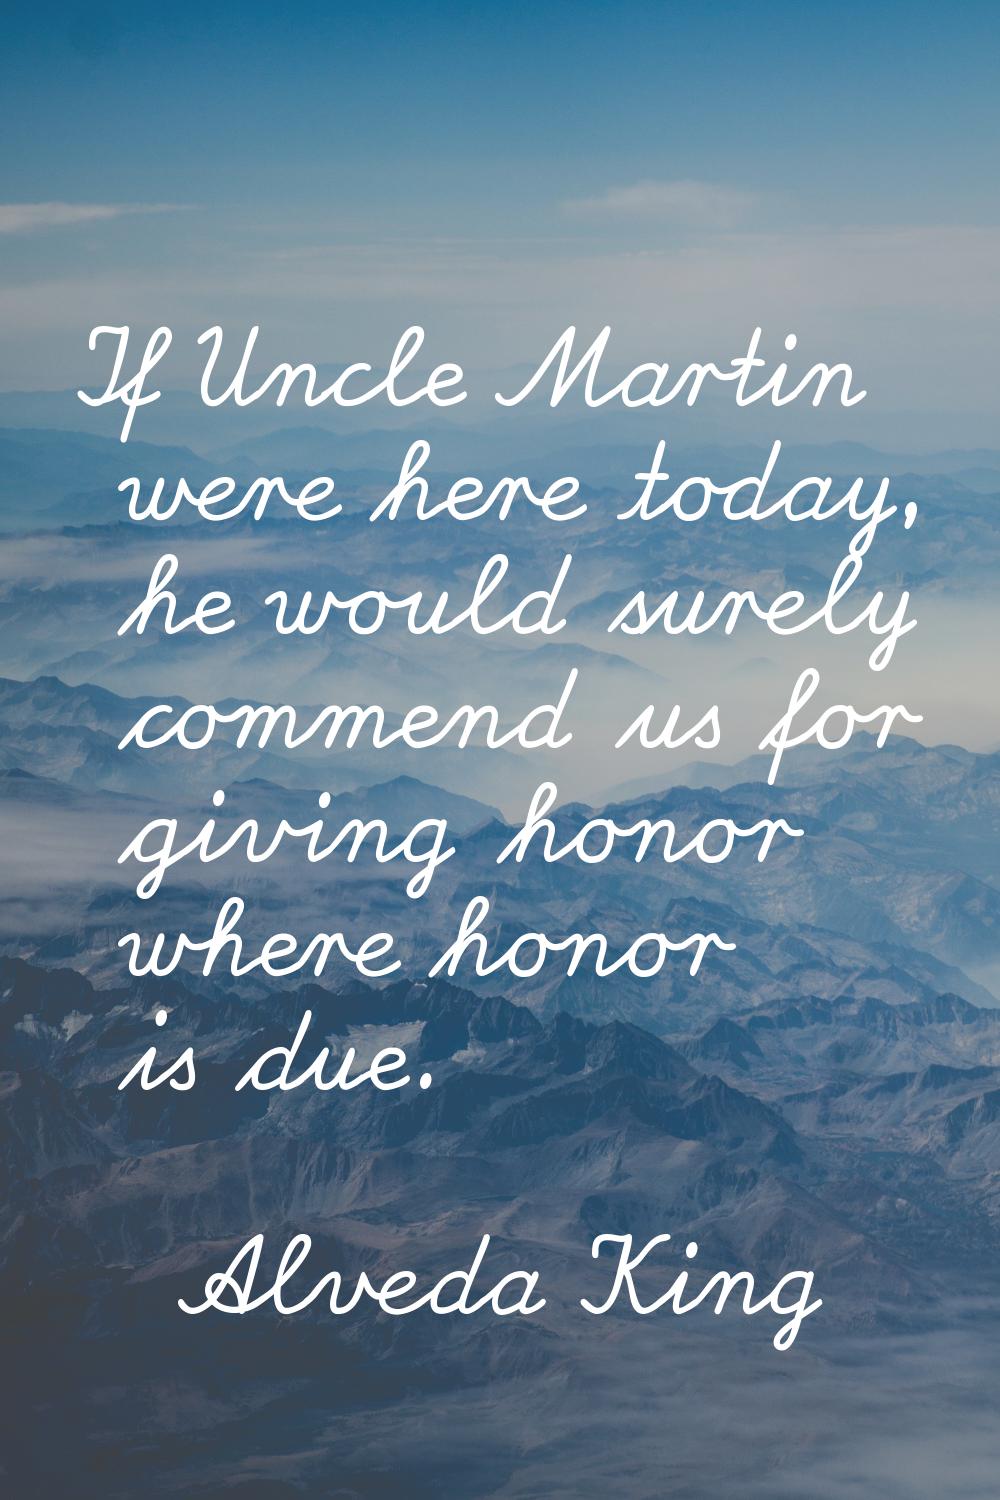 If Uncle Martin were here today, he would surely commend us for giving honor where honor is due.